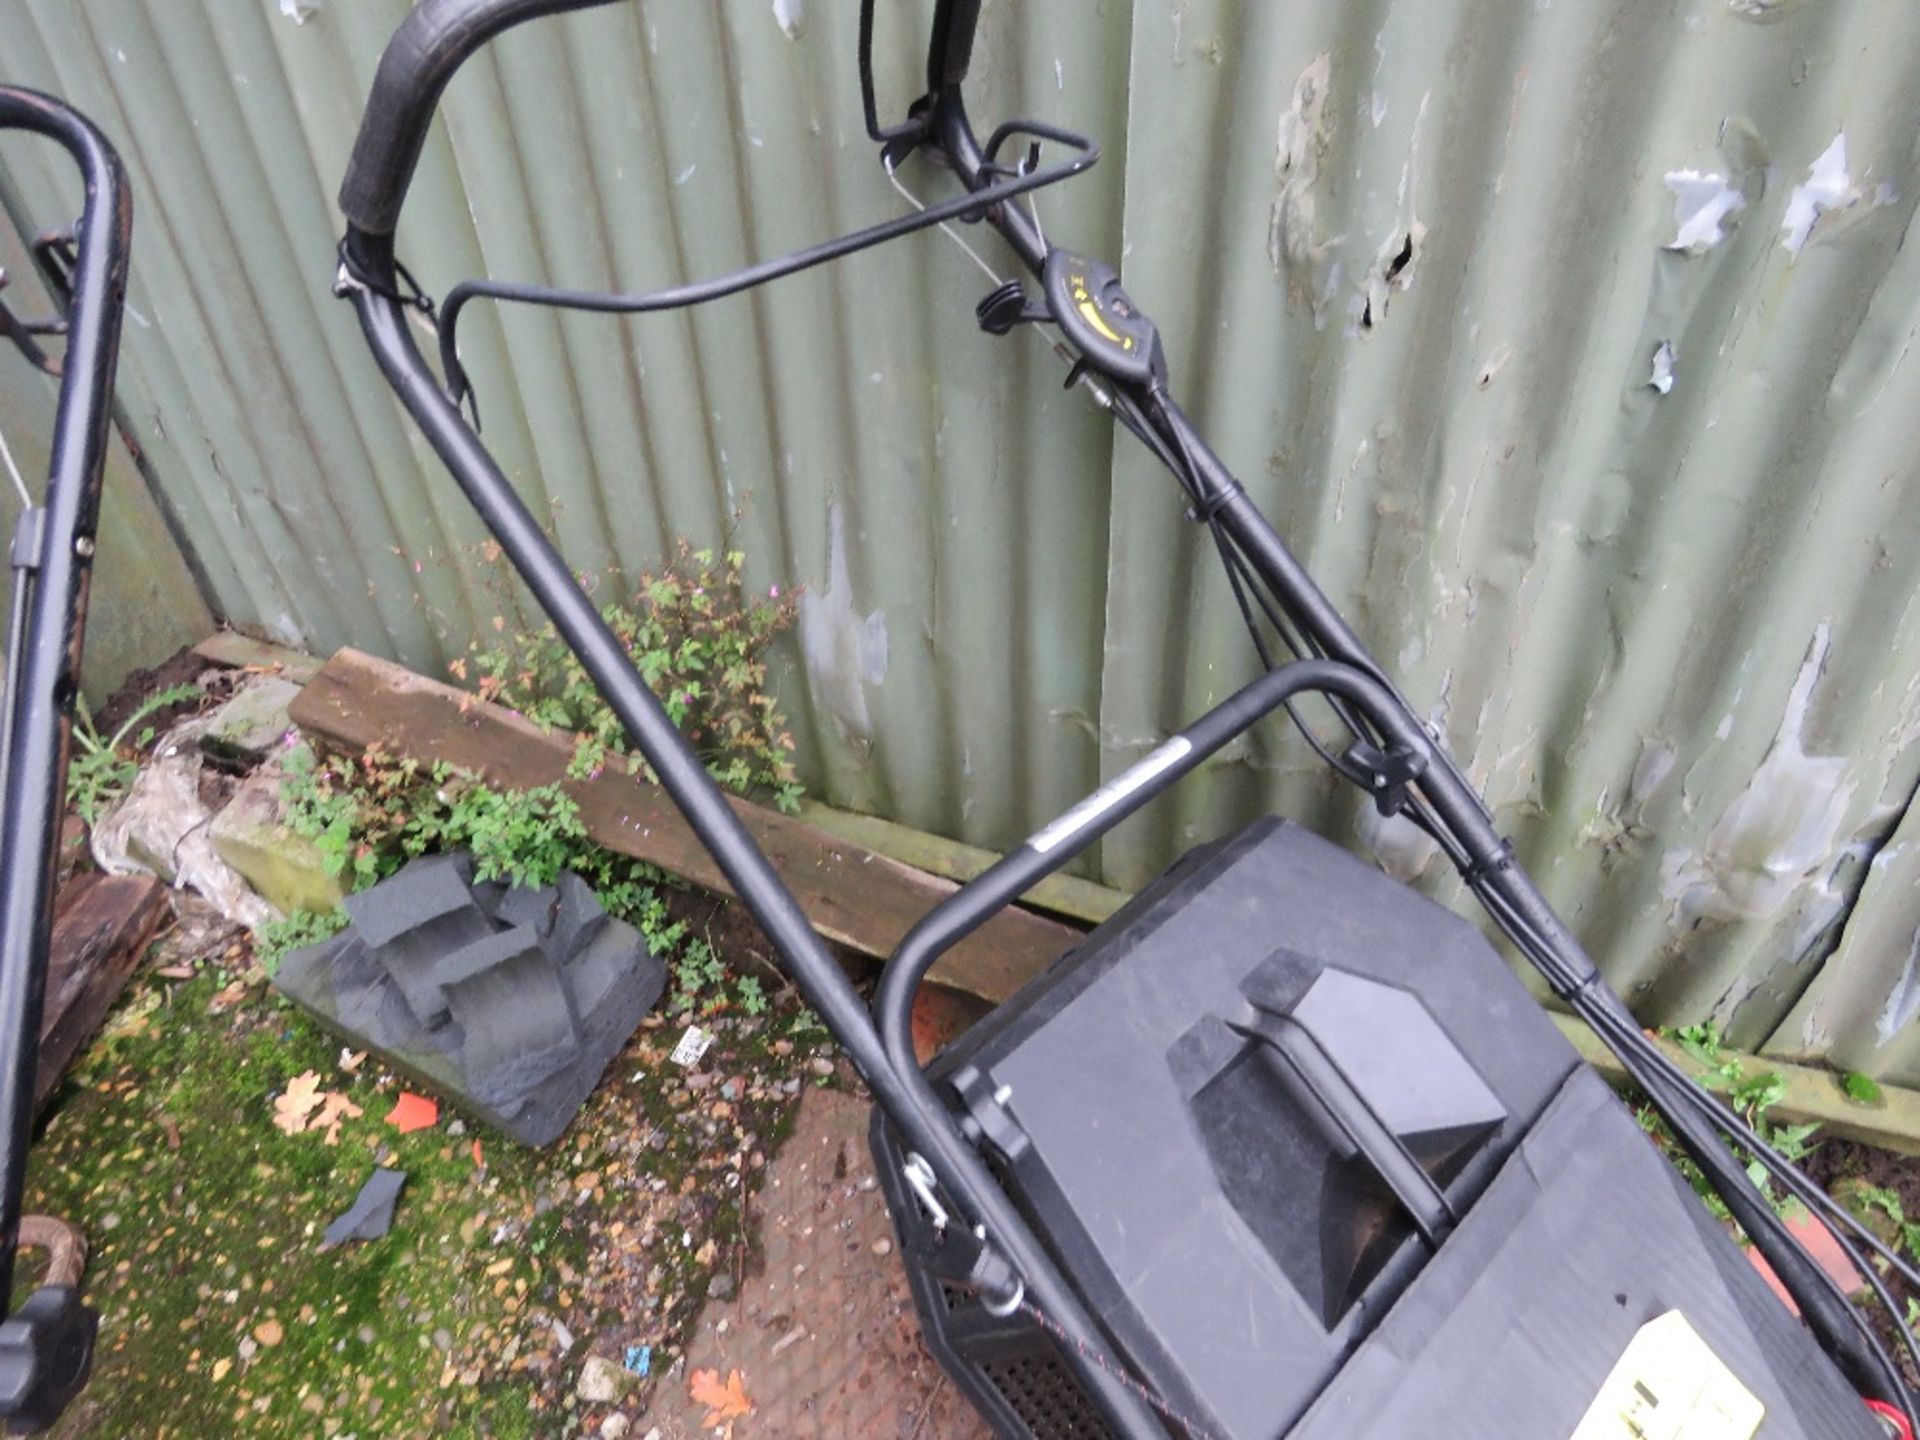 RED PETROL ENGINED LAWN MOWER, WITH BOX. THIS LOT IS SOLD UNDER THE AUCTIONEERS MARGIN SCHEME, TH - Image 3 of 3